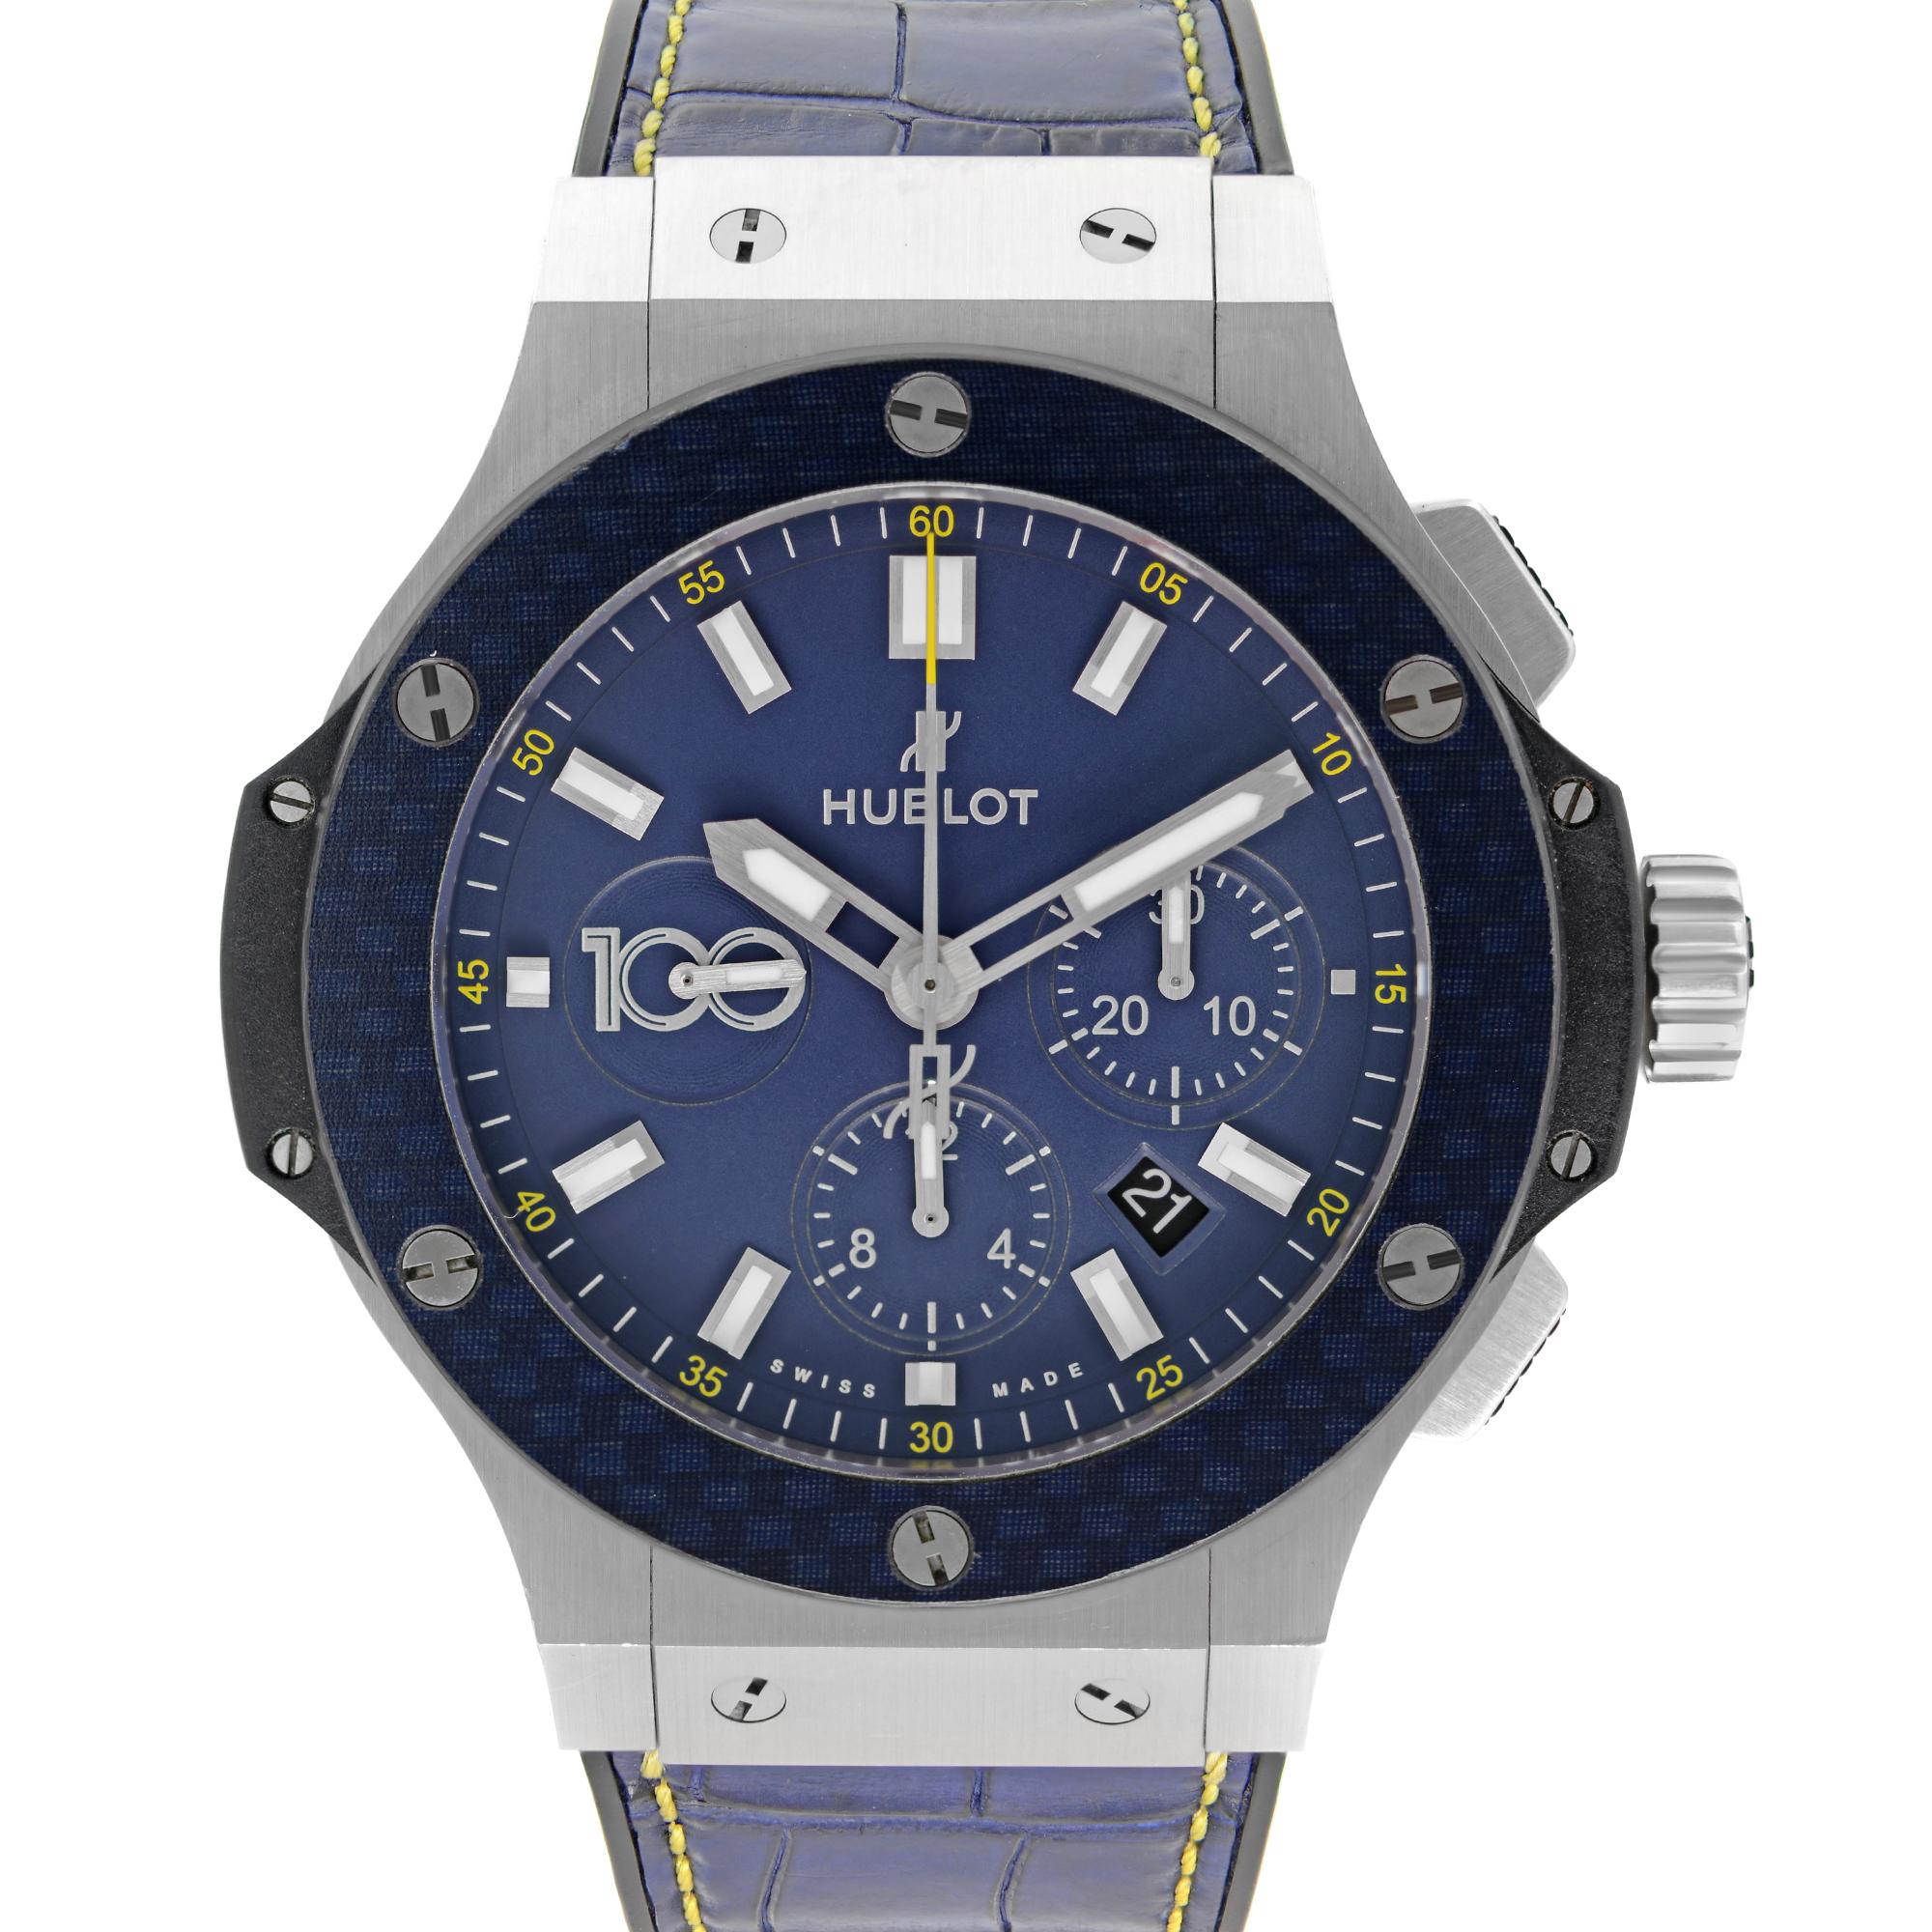 Pre Owned Hublot Big Bang Special Edition Club America Men's Watch 301.SQ.7179.LR.CLA16. This Beautiful Timepiece is Powered by Mechanical (Automatic) Movement And Features: Round Stainless Steel / Titanium Case With a Blue Leather Strap with Rubber